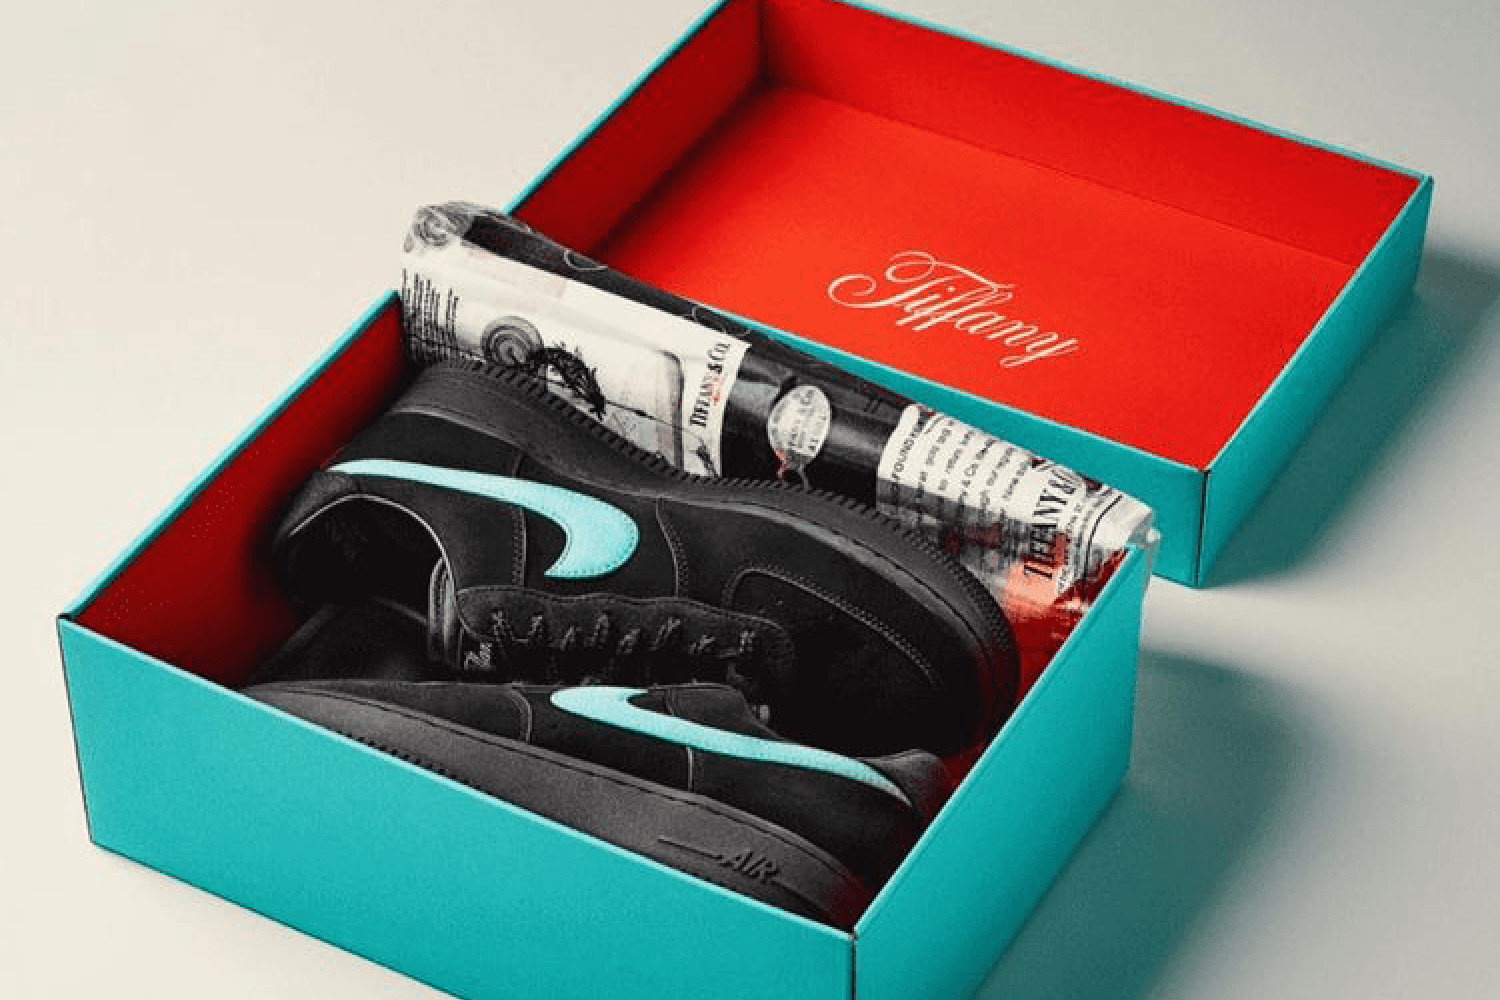 An Official Look at the Tiffany & Co x Nike Air Force 1 'Black